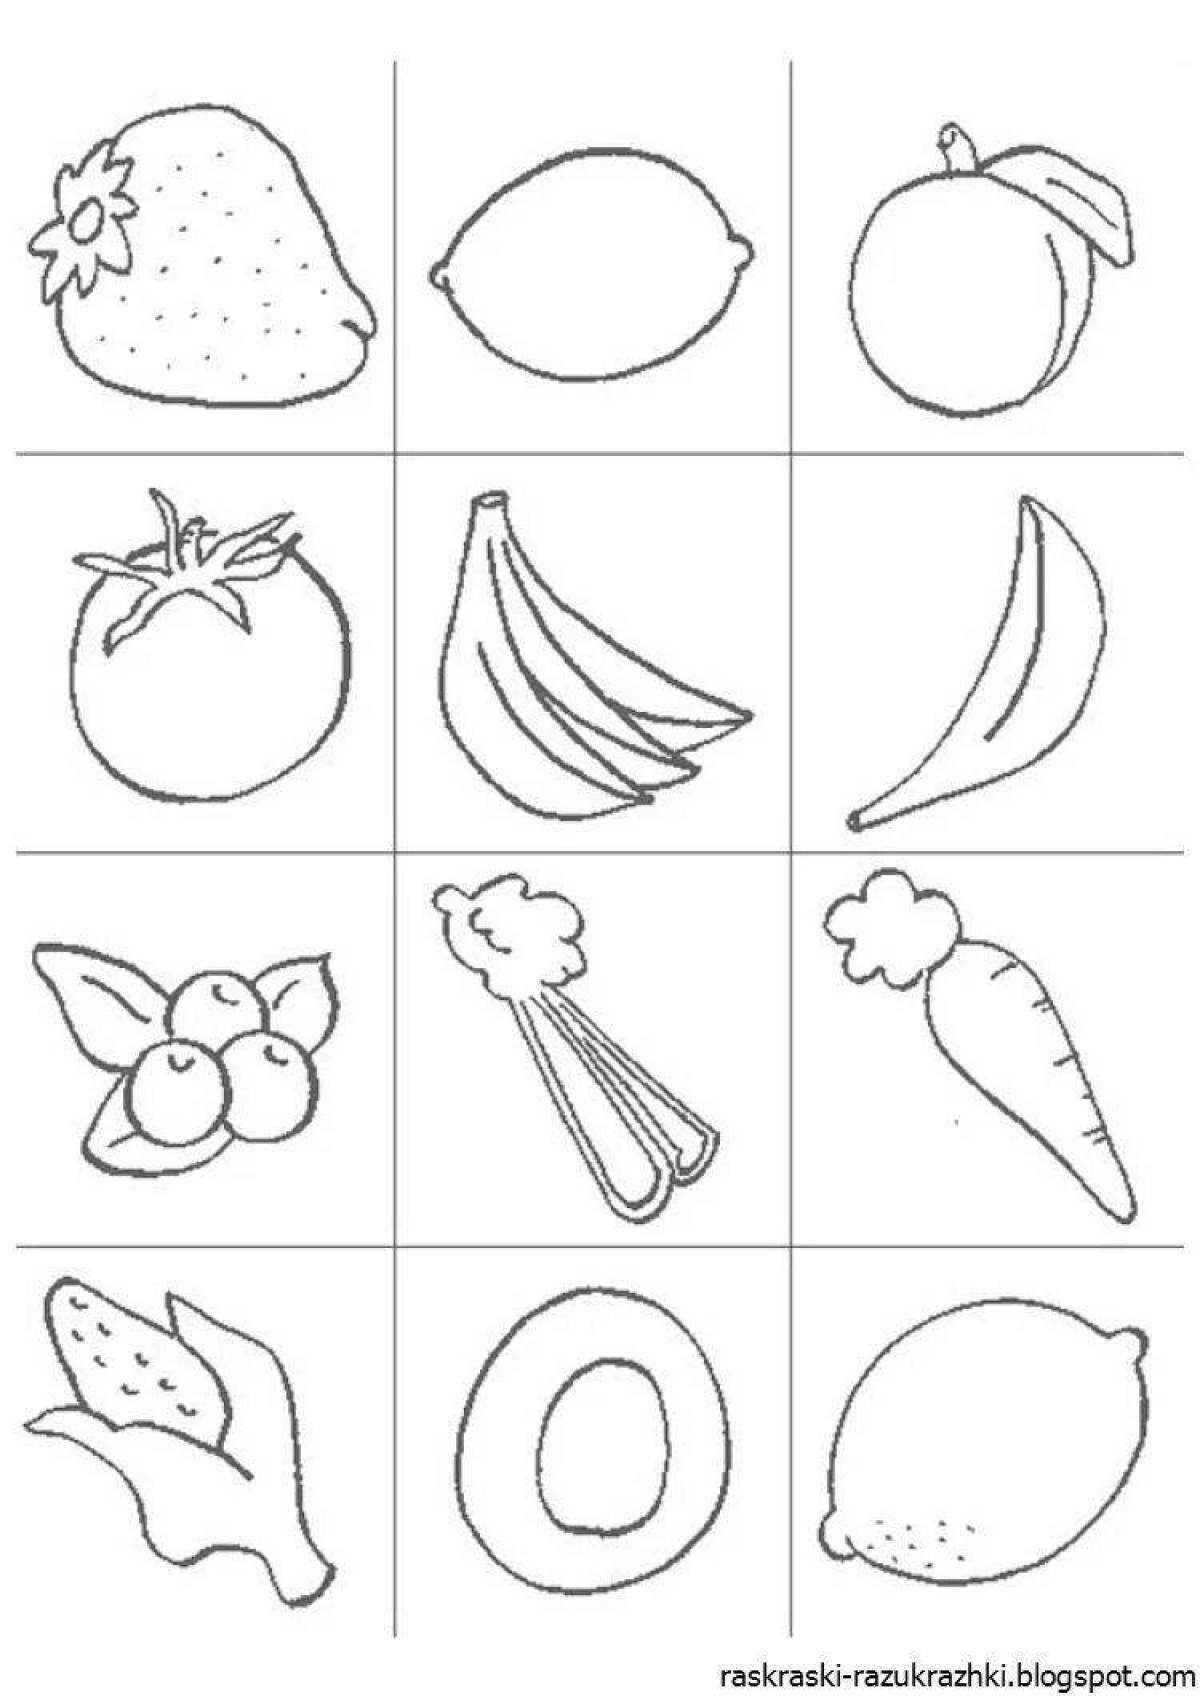 Colorful coloring pages for fun